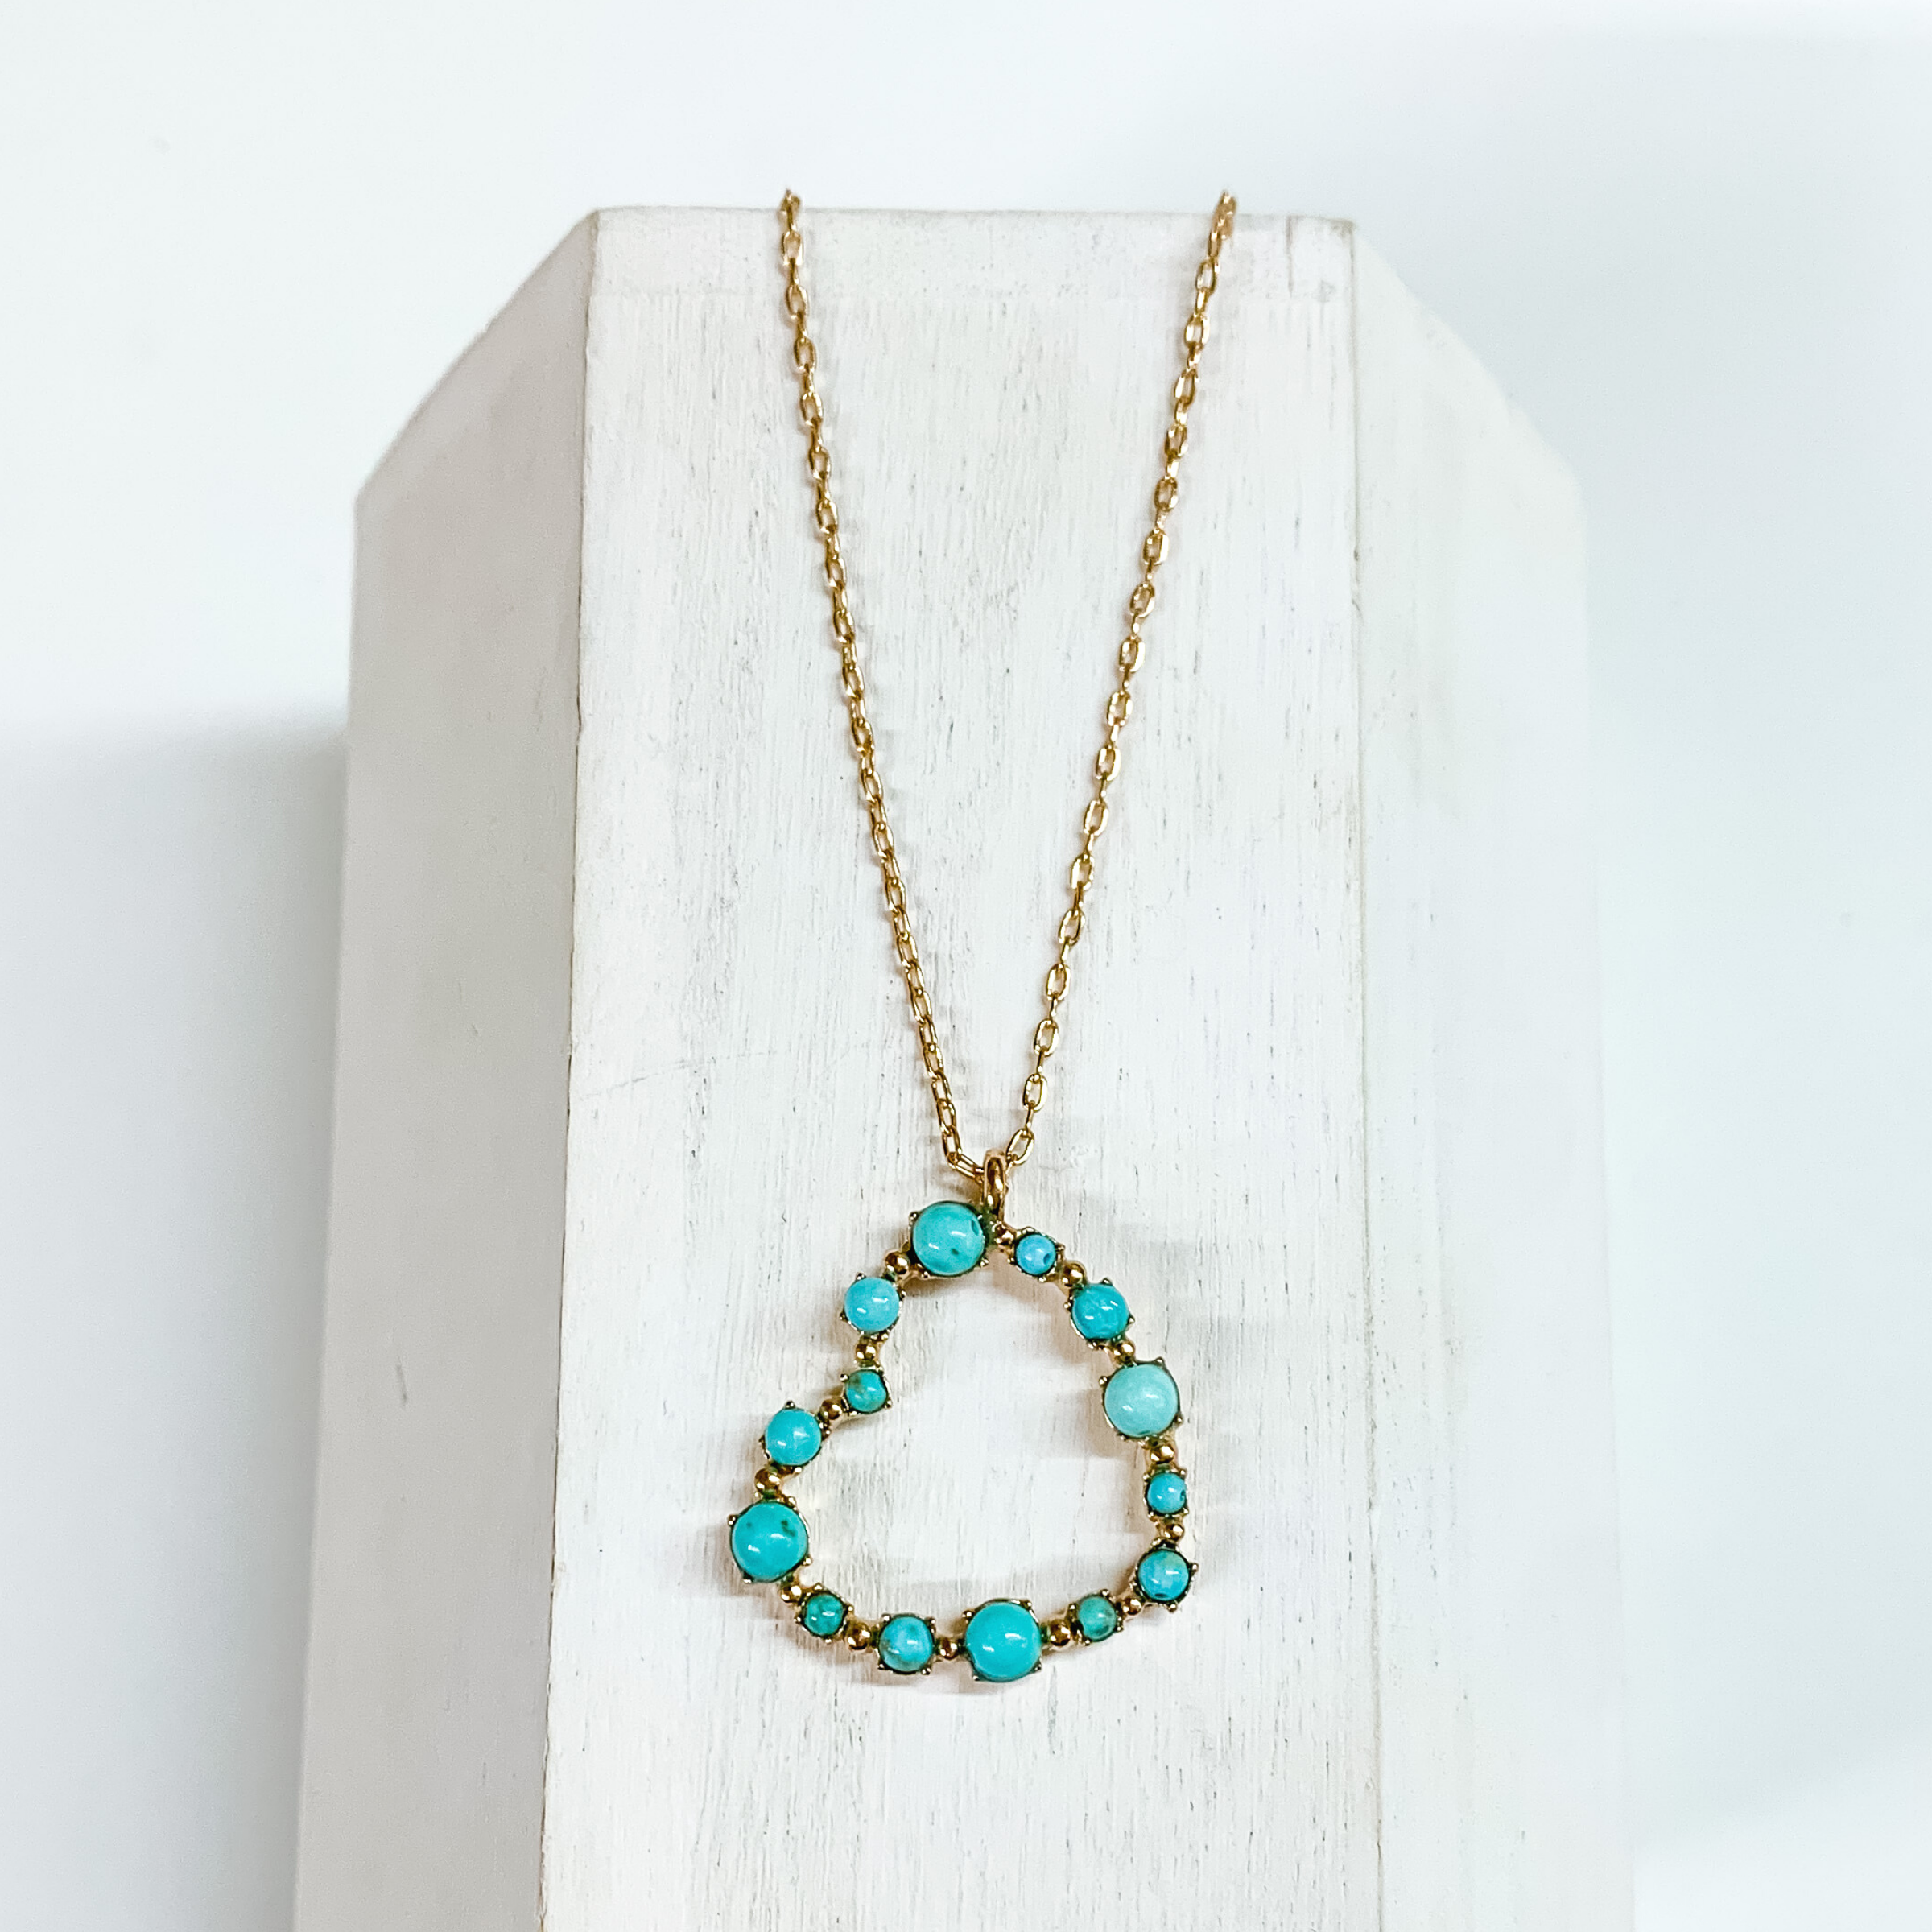 Gold chain necklace with a gold heart pendant that has turquoise stones outlining it. This necklace is pictured on a white block on a white background. 